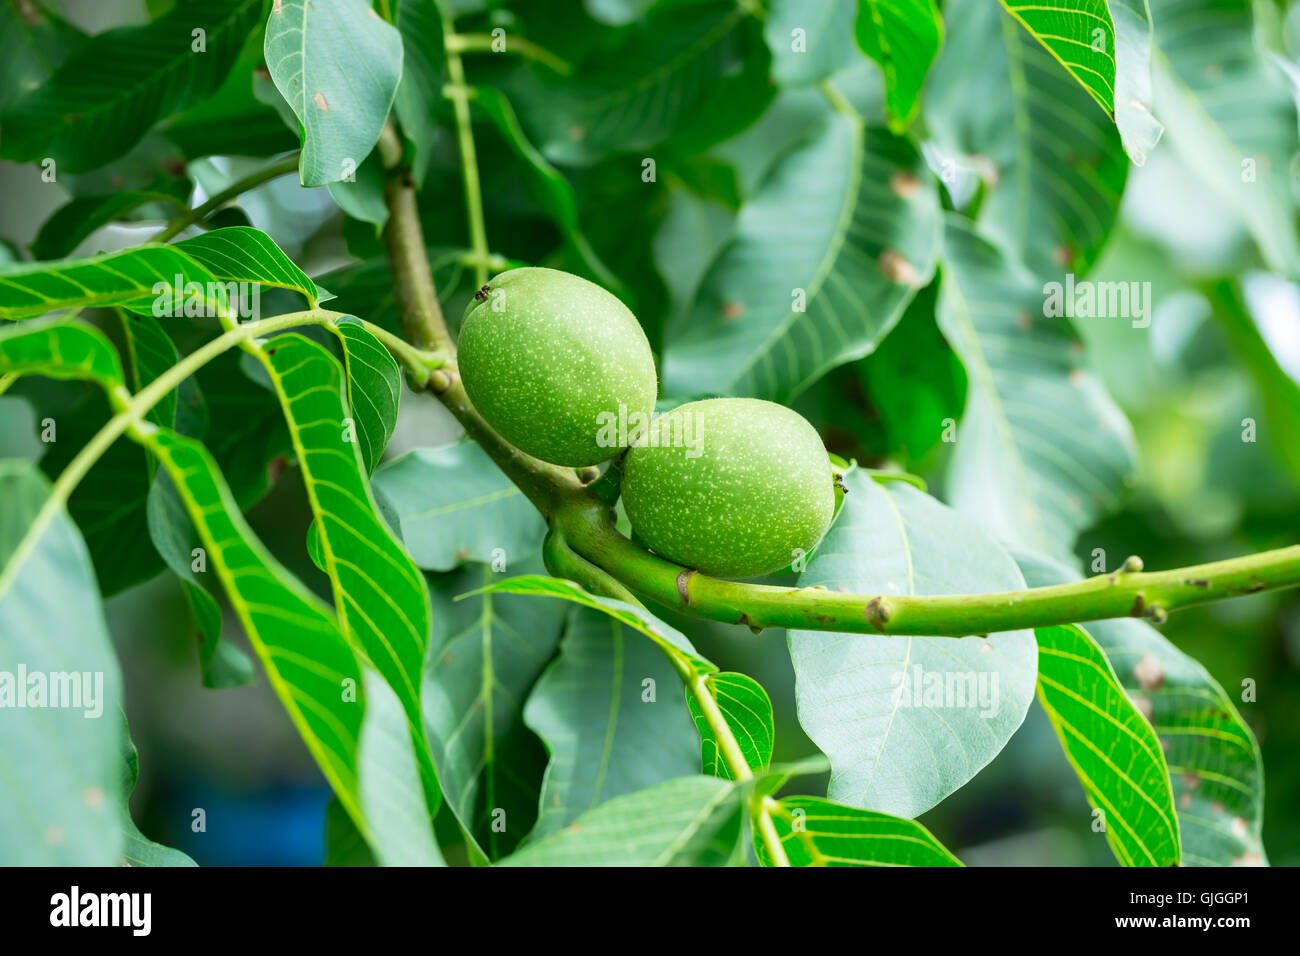 Young walnuts in green shell on a tree Stock Photo